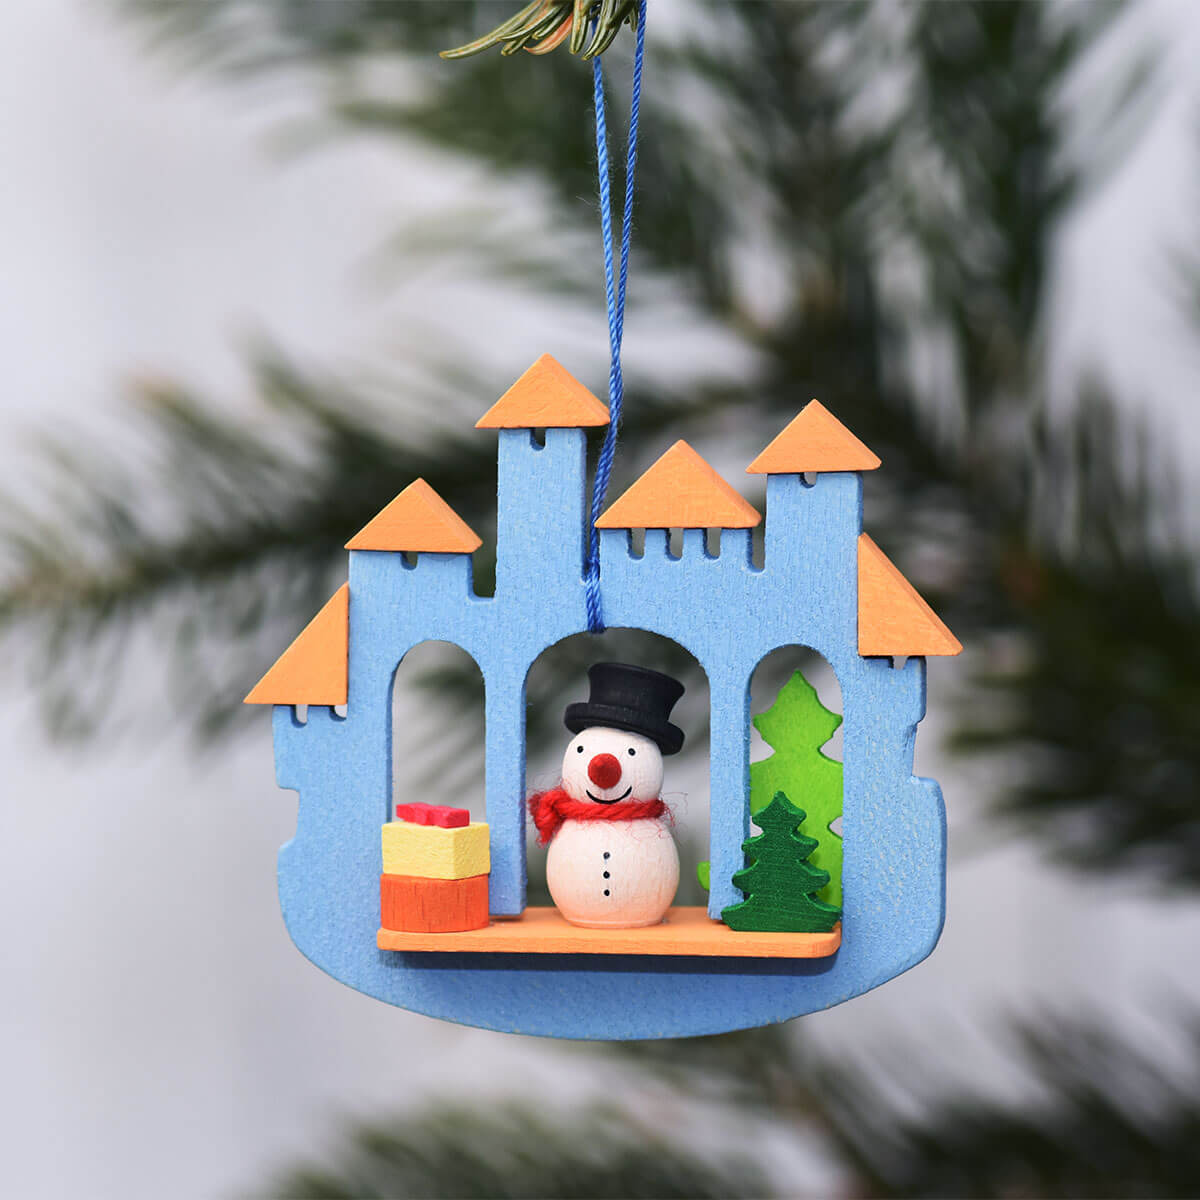 City Gate Ornament with snowman